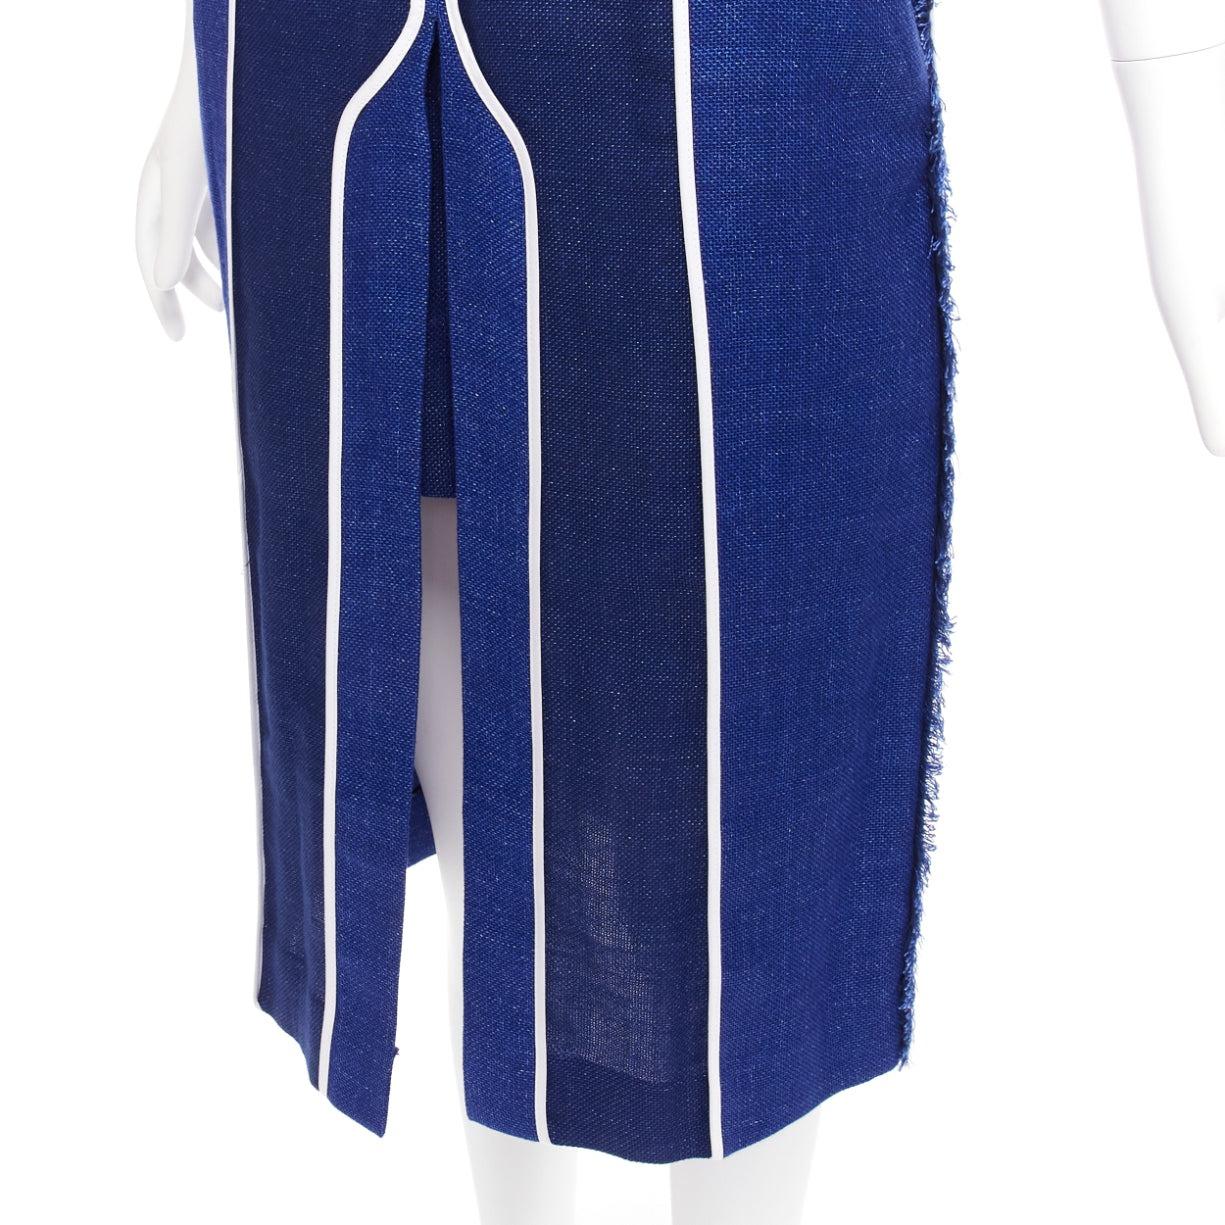 new ACNE STUDIOS 2016 Kent Linen blue striped wool slit front midi skirt FR34 XS
Reference: NKLL/A00042
Brand: Acne Studios
Model: Kent Linen
Collection: SS 2016
Material: Linen, Wool
Color: White, Blue
Pattern: Solid
Closure: Zip
Extra Details: Zip